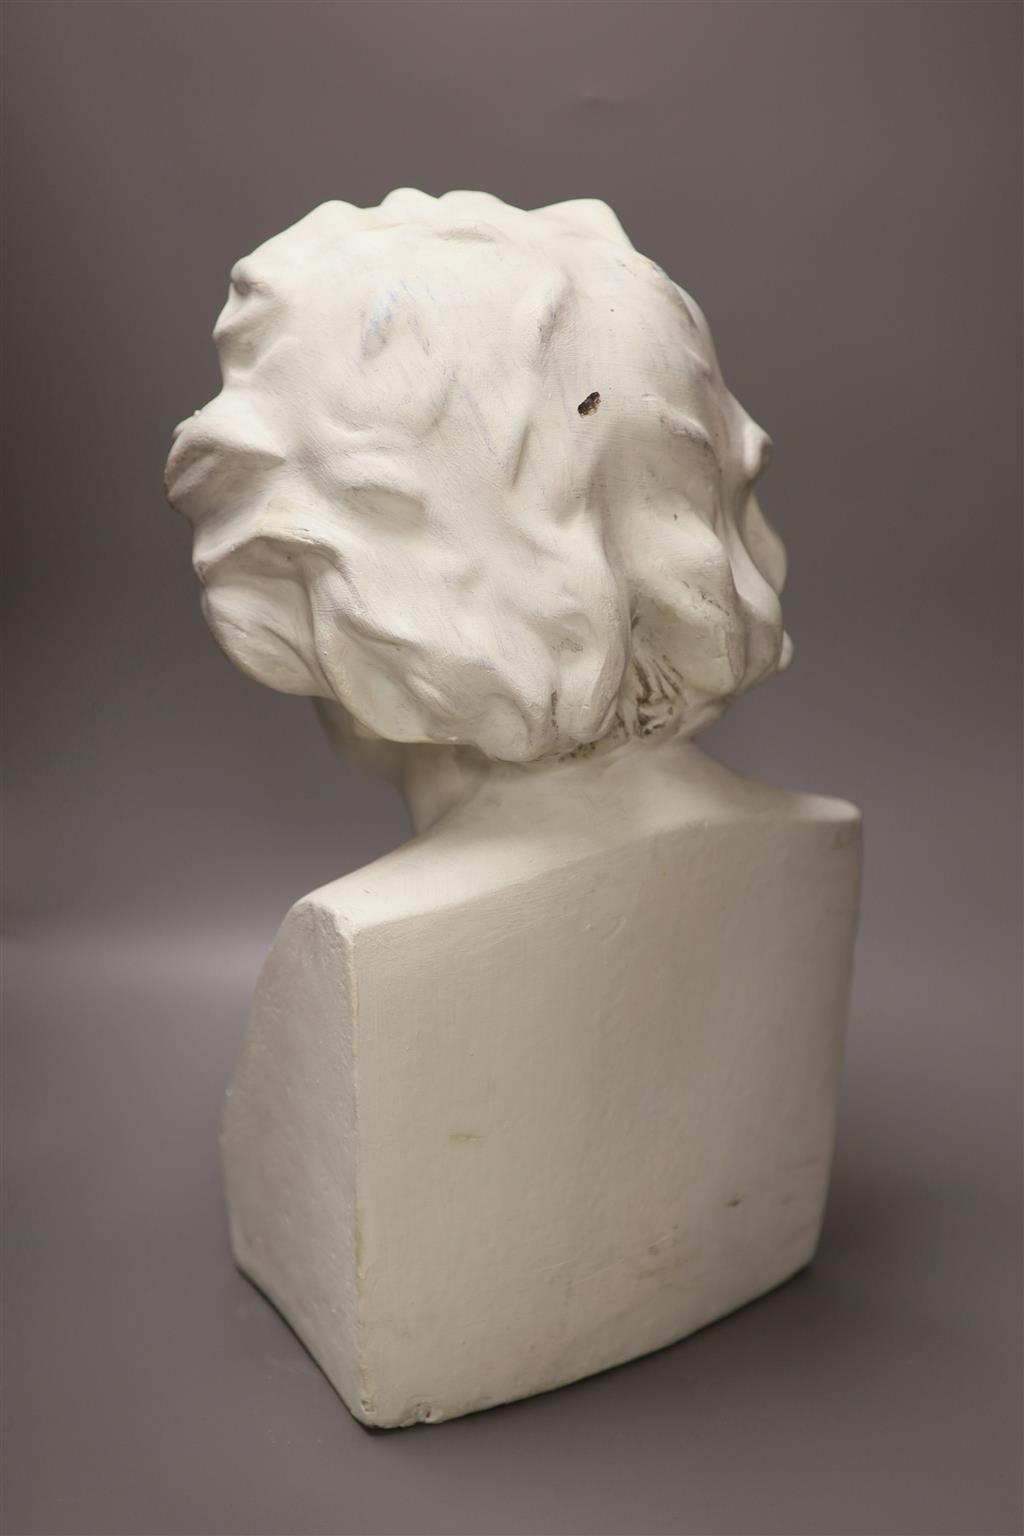 A cast composition portrait bust of Beethoven, height 48cm